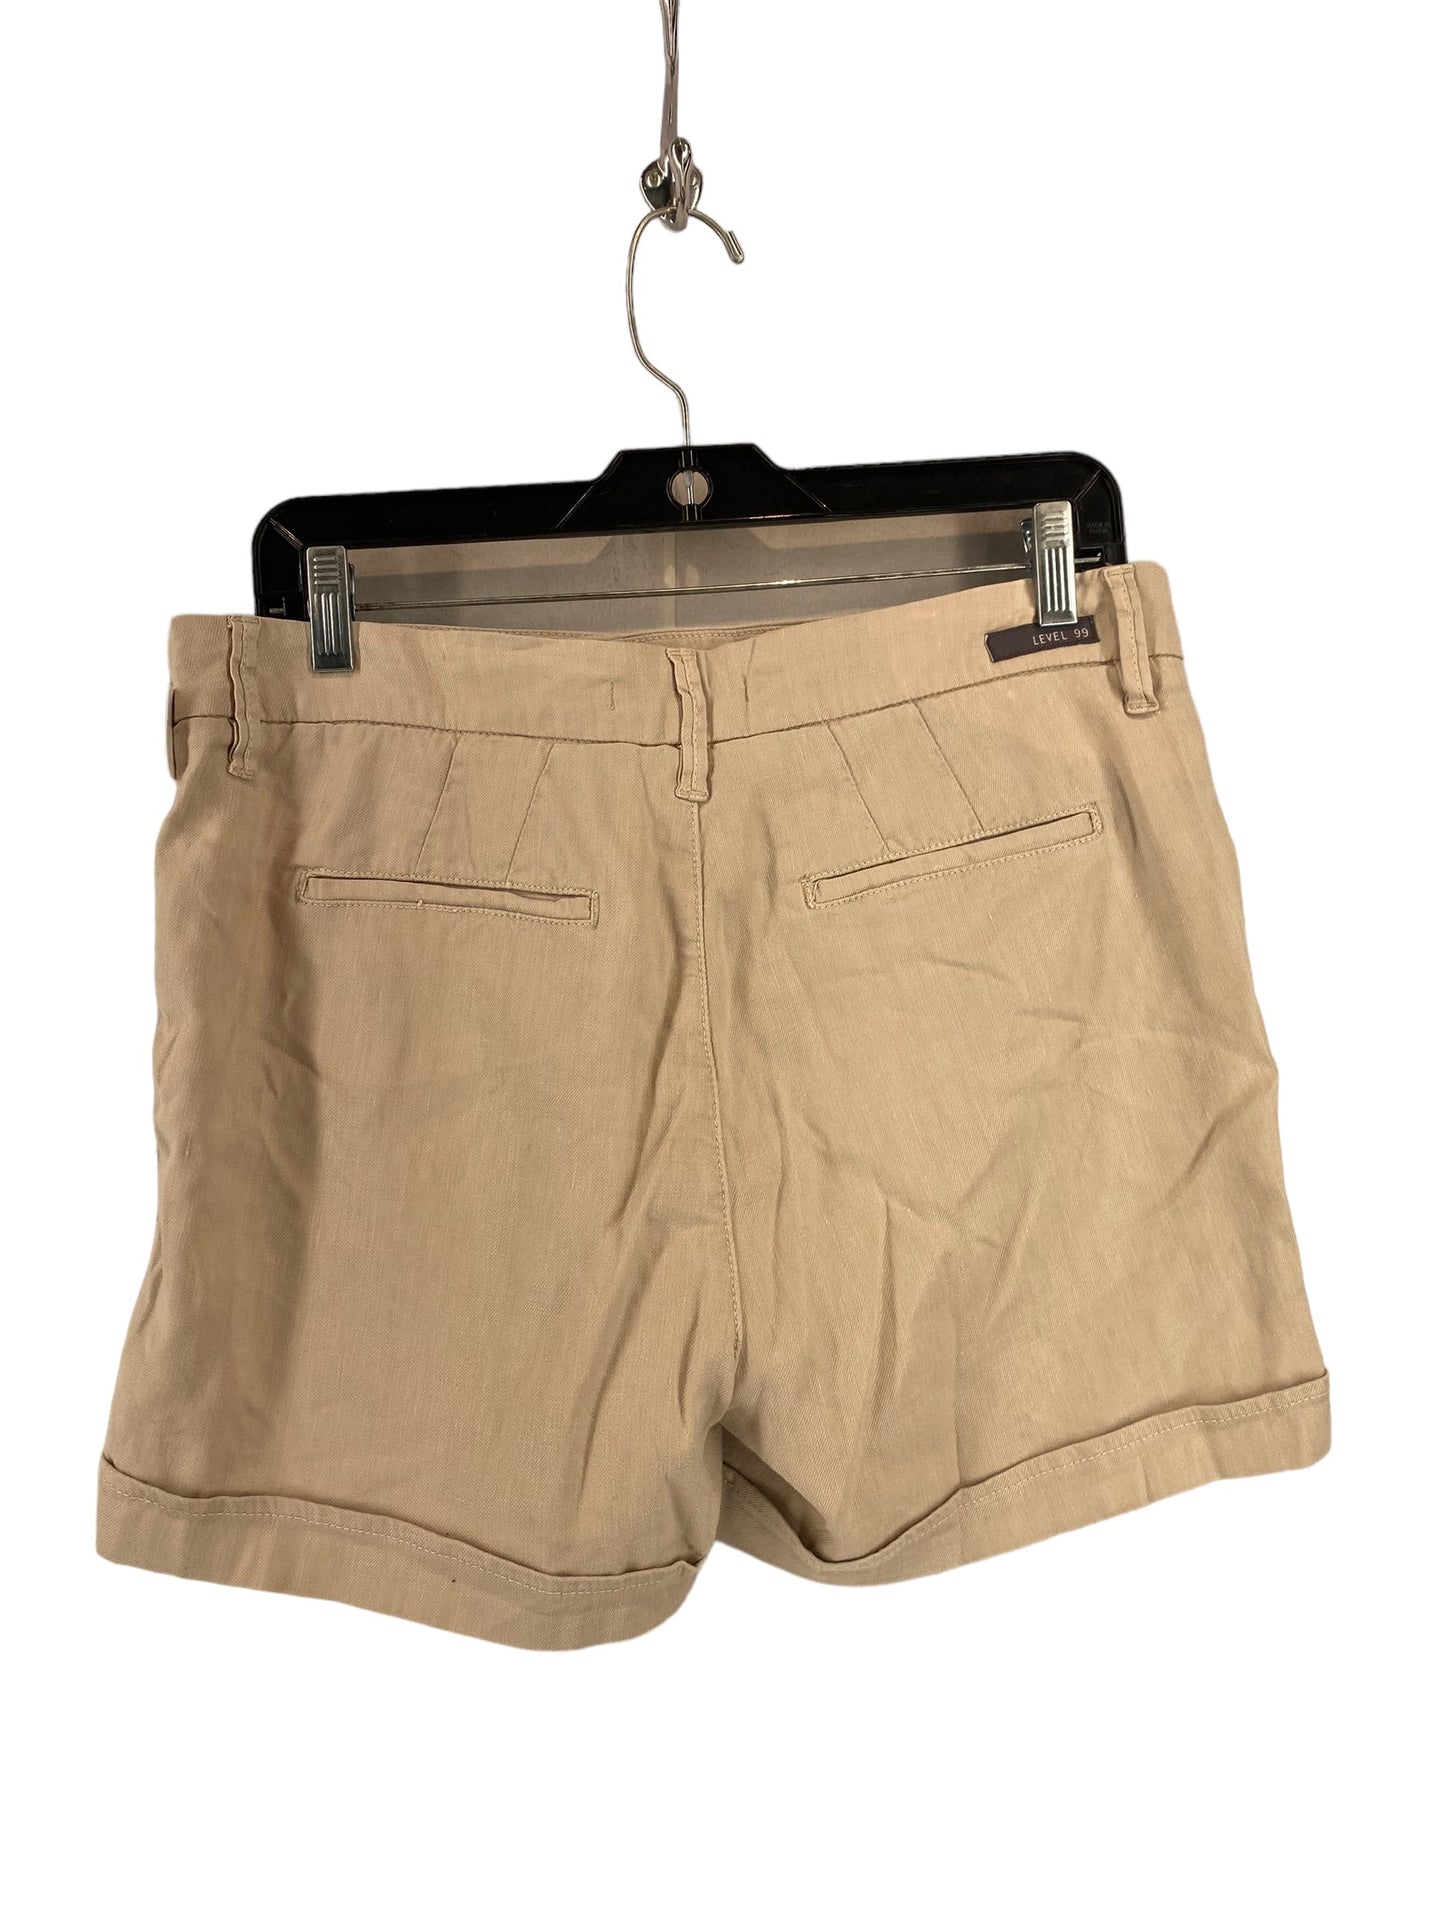 Shorts By Level 99  Size: 28